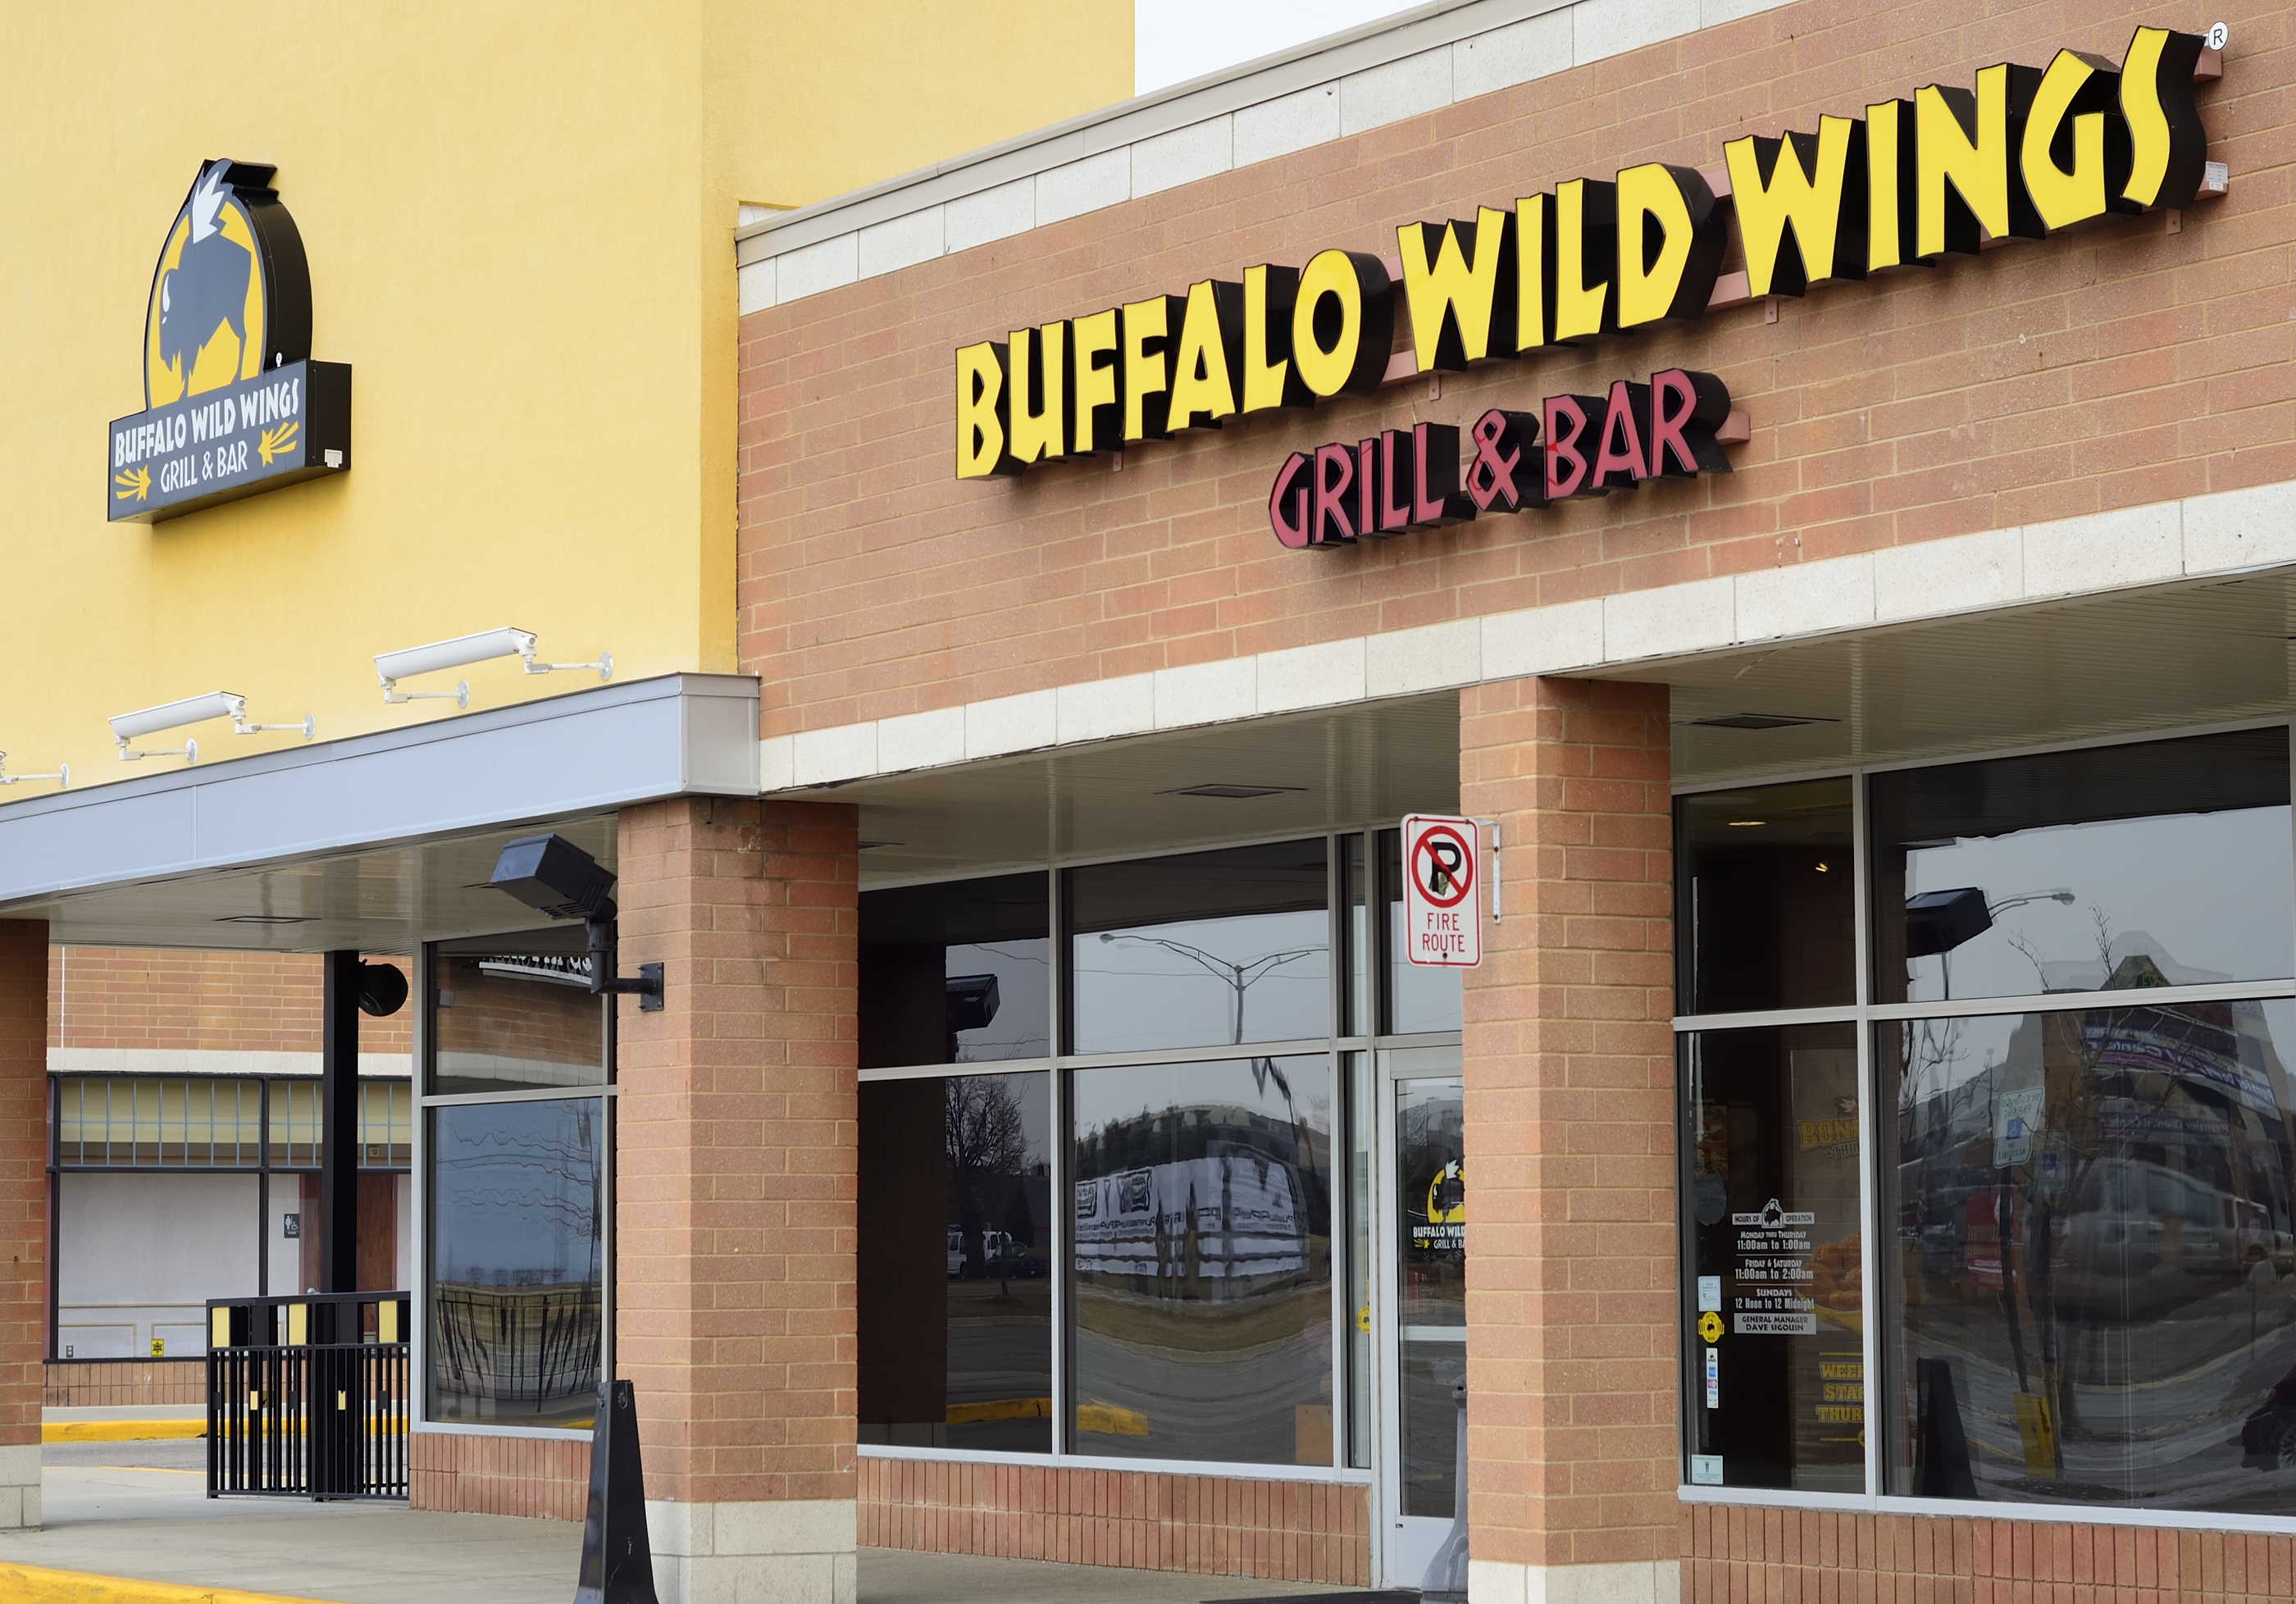 Things You Didn't Know About Buffalo Wild Wings